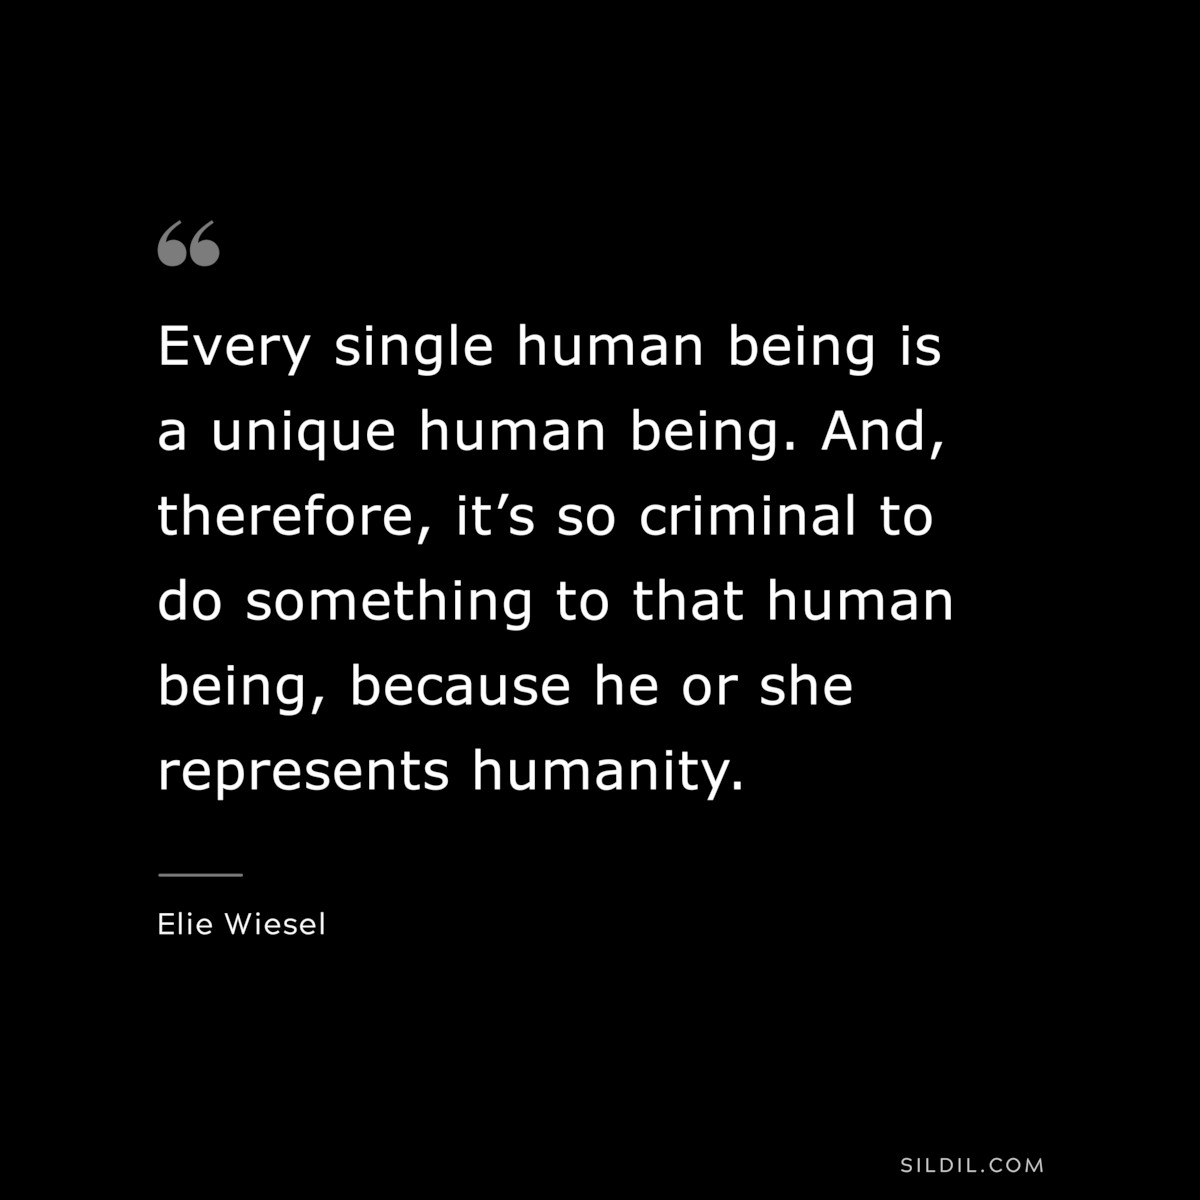 Every single human being is a unique human being. And, therefore, it’s so criminal to do something to that human being, because he or she represents humanity. ― Elie Wiesel